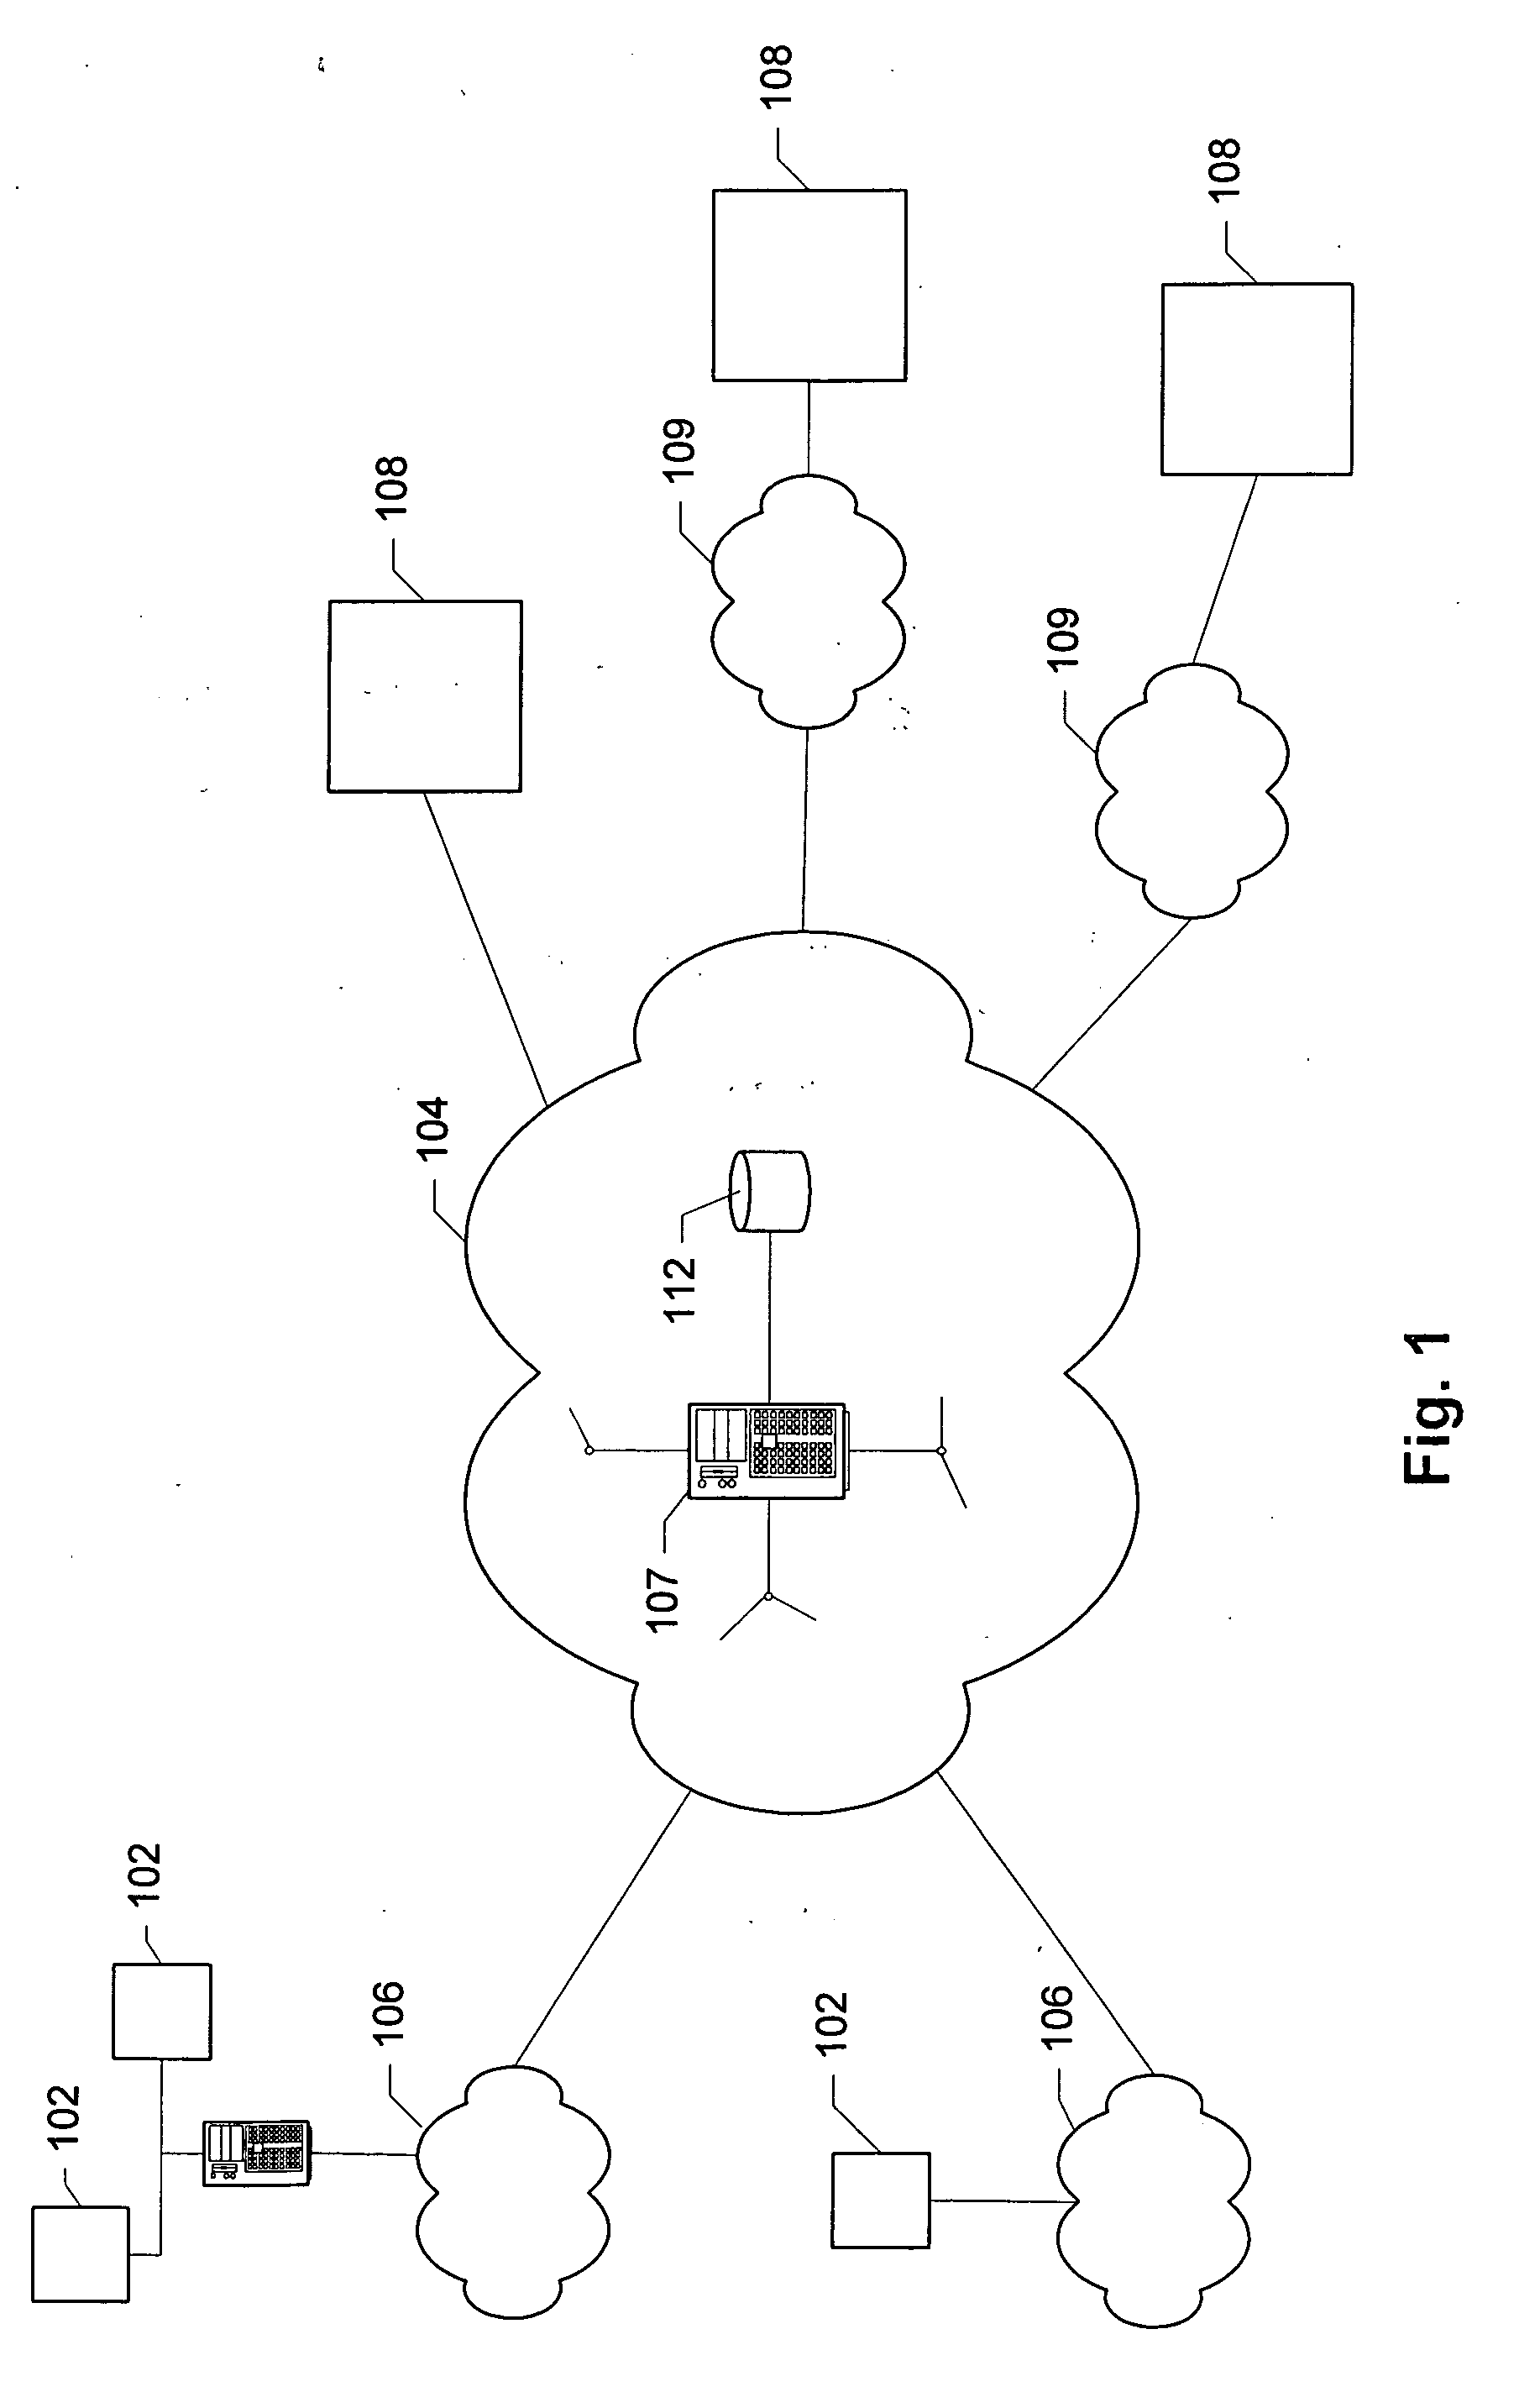 Providing on-demand access to services in a wide area network